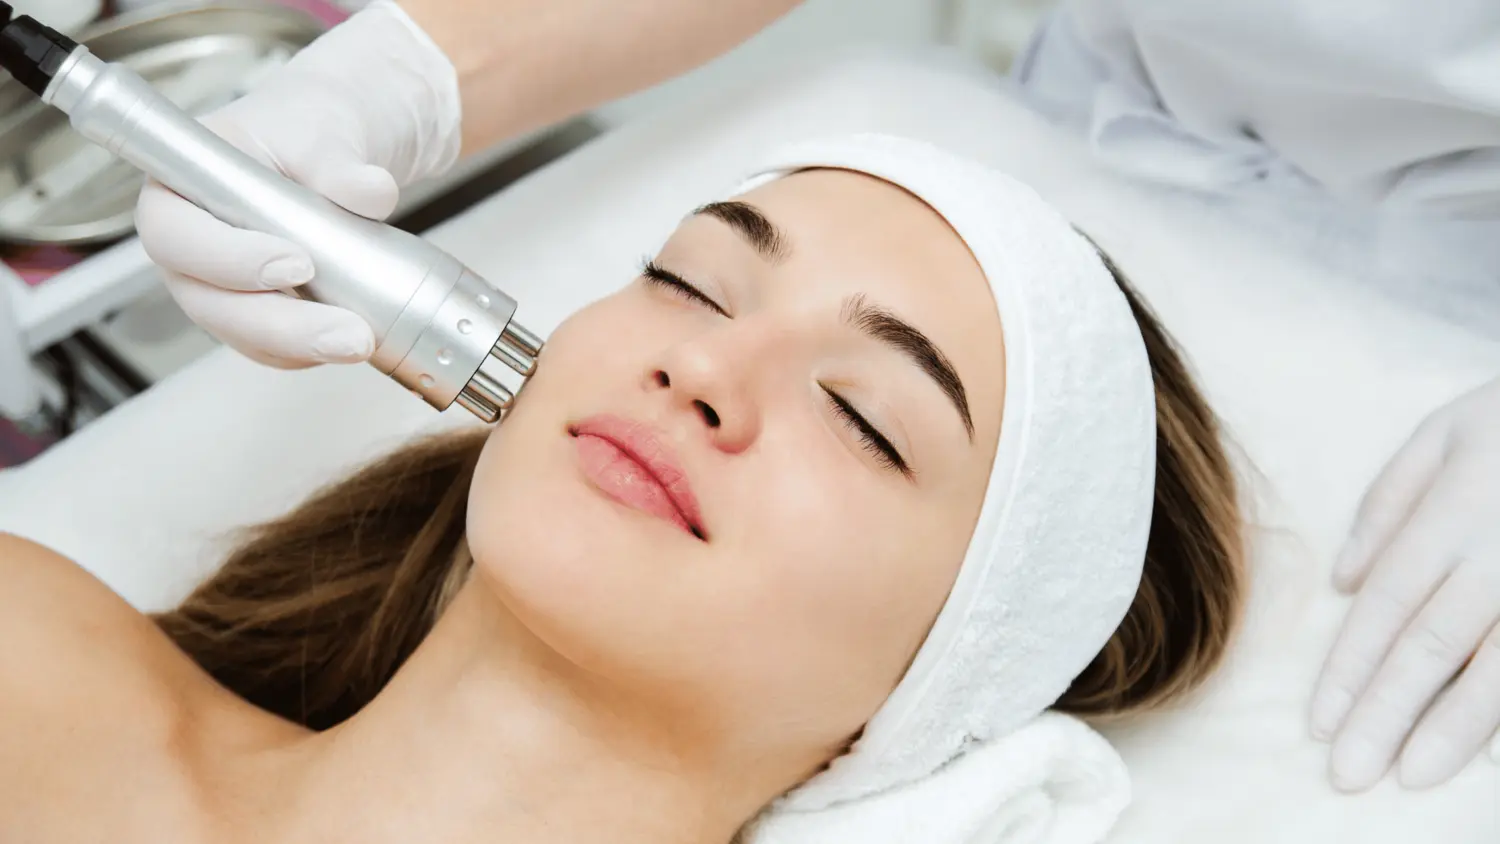 A young woman who looks like a patient of a med spa, receiving facial services 